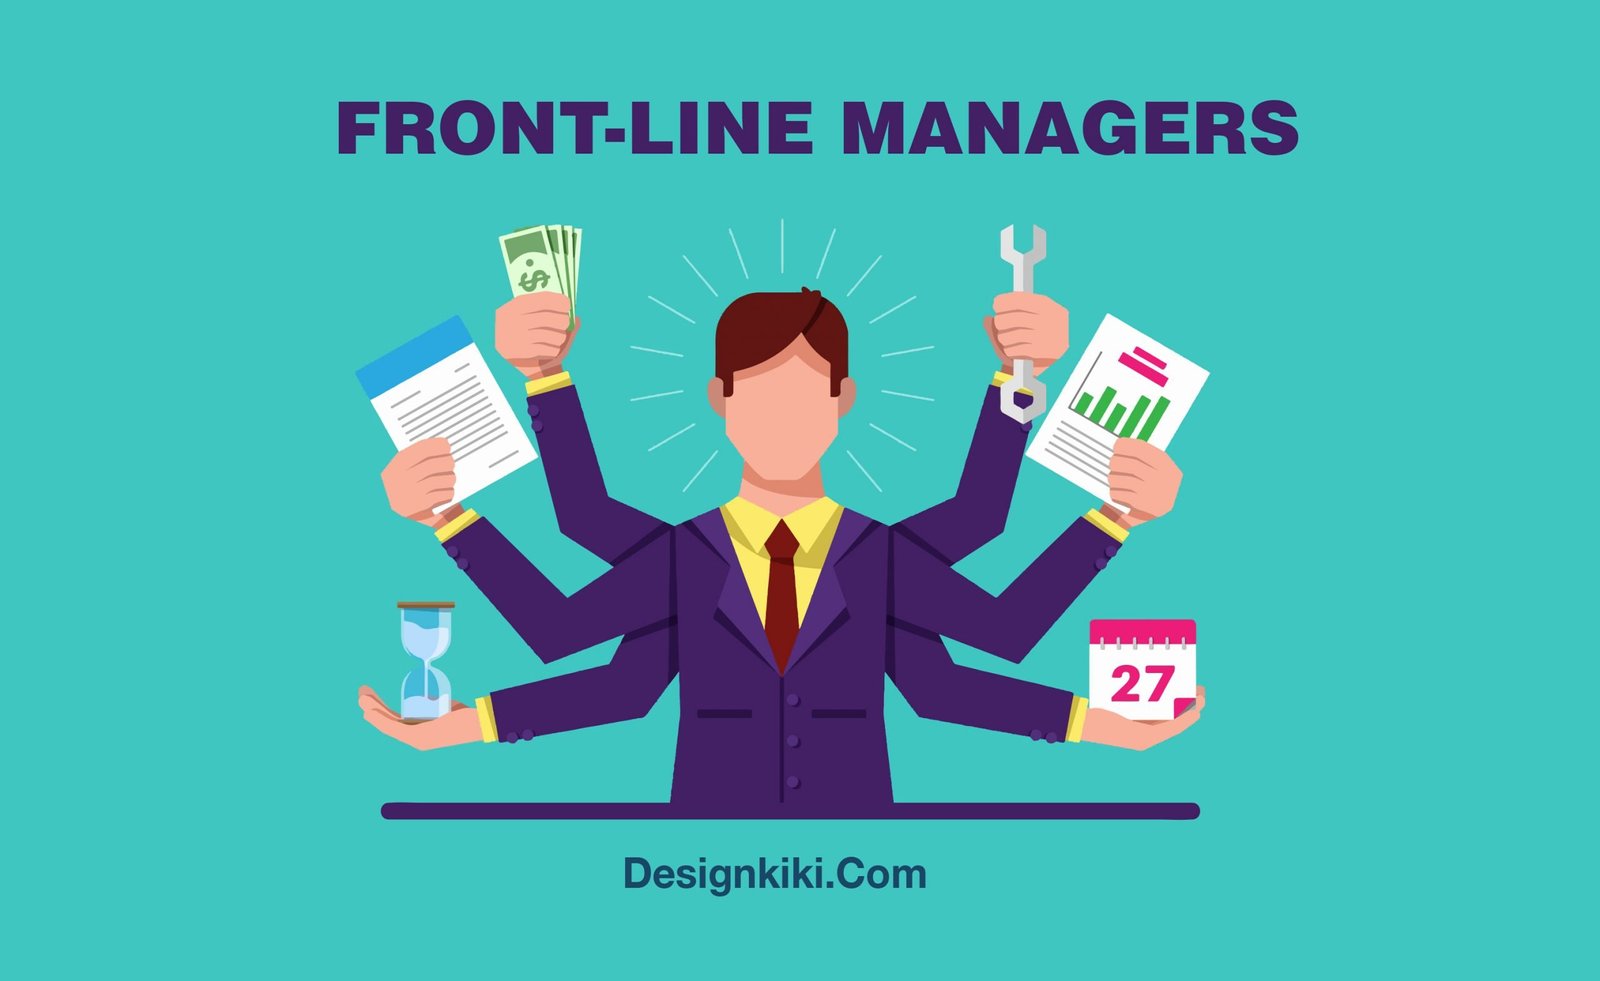 front-line managers